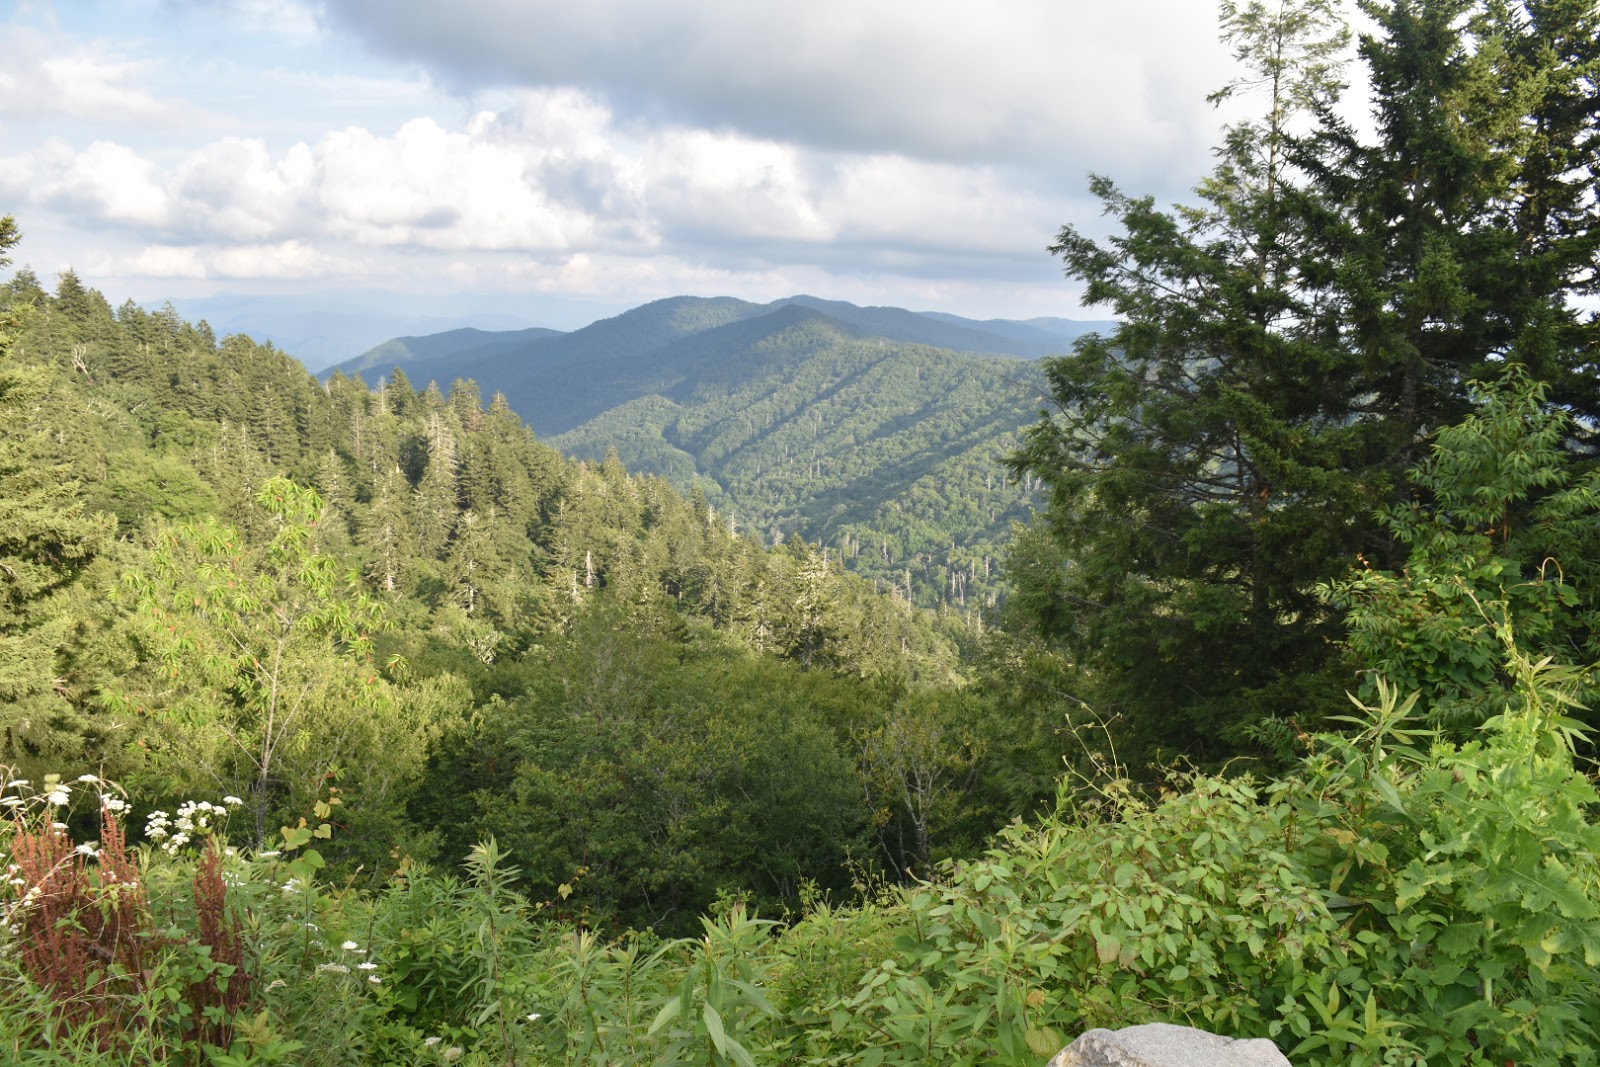 The Great Smoky Mountains in Tennessee